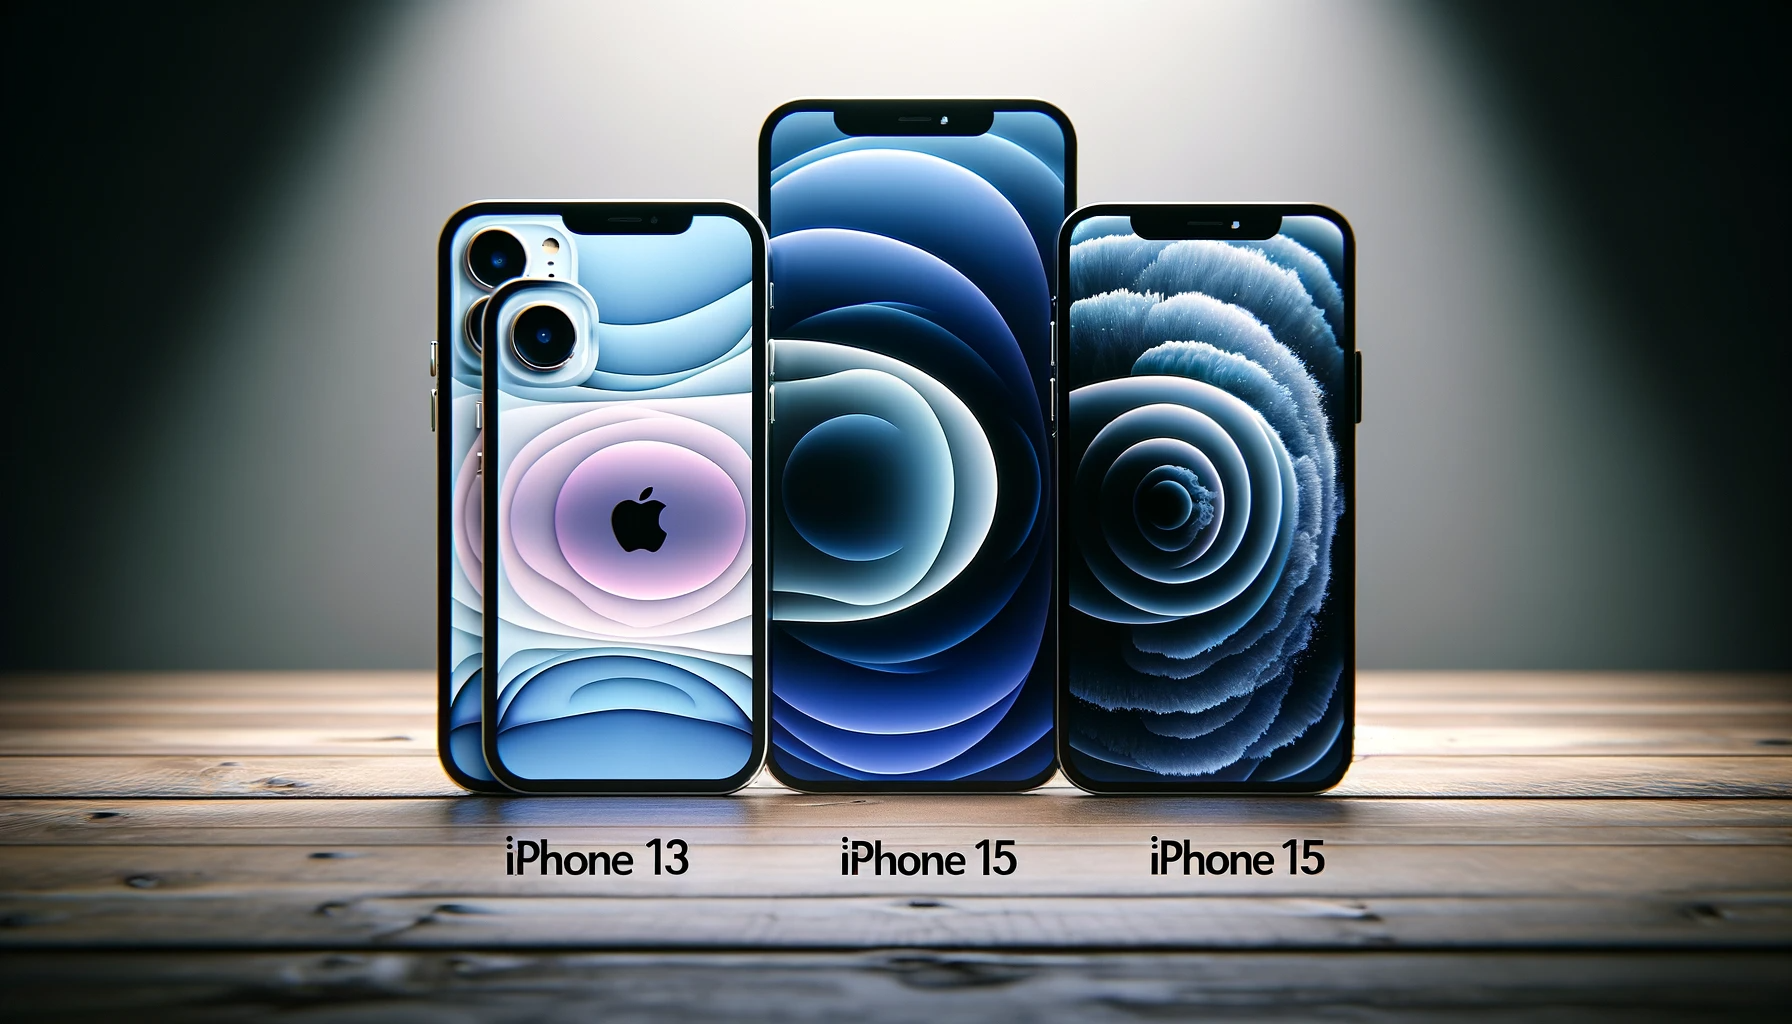 Is the iPhone 13 Better Than the iPhone 15?